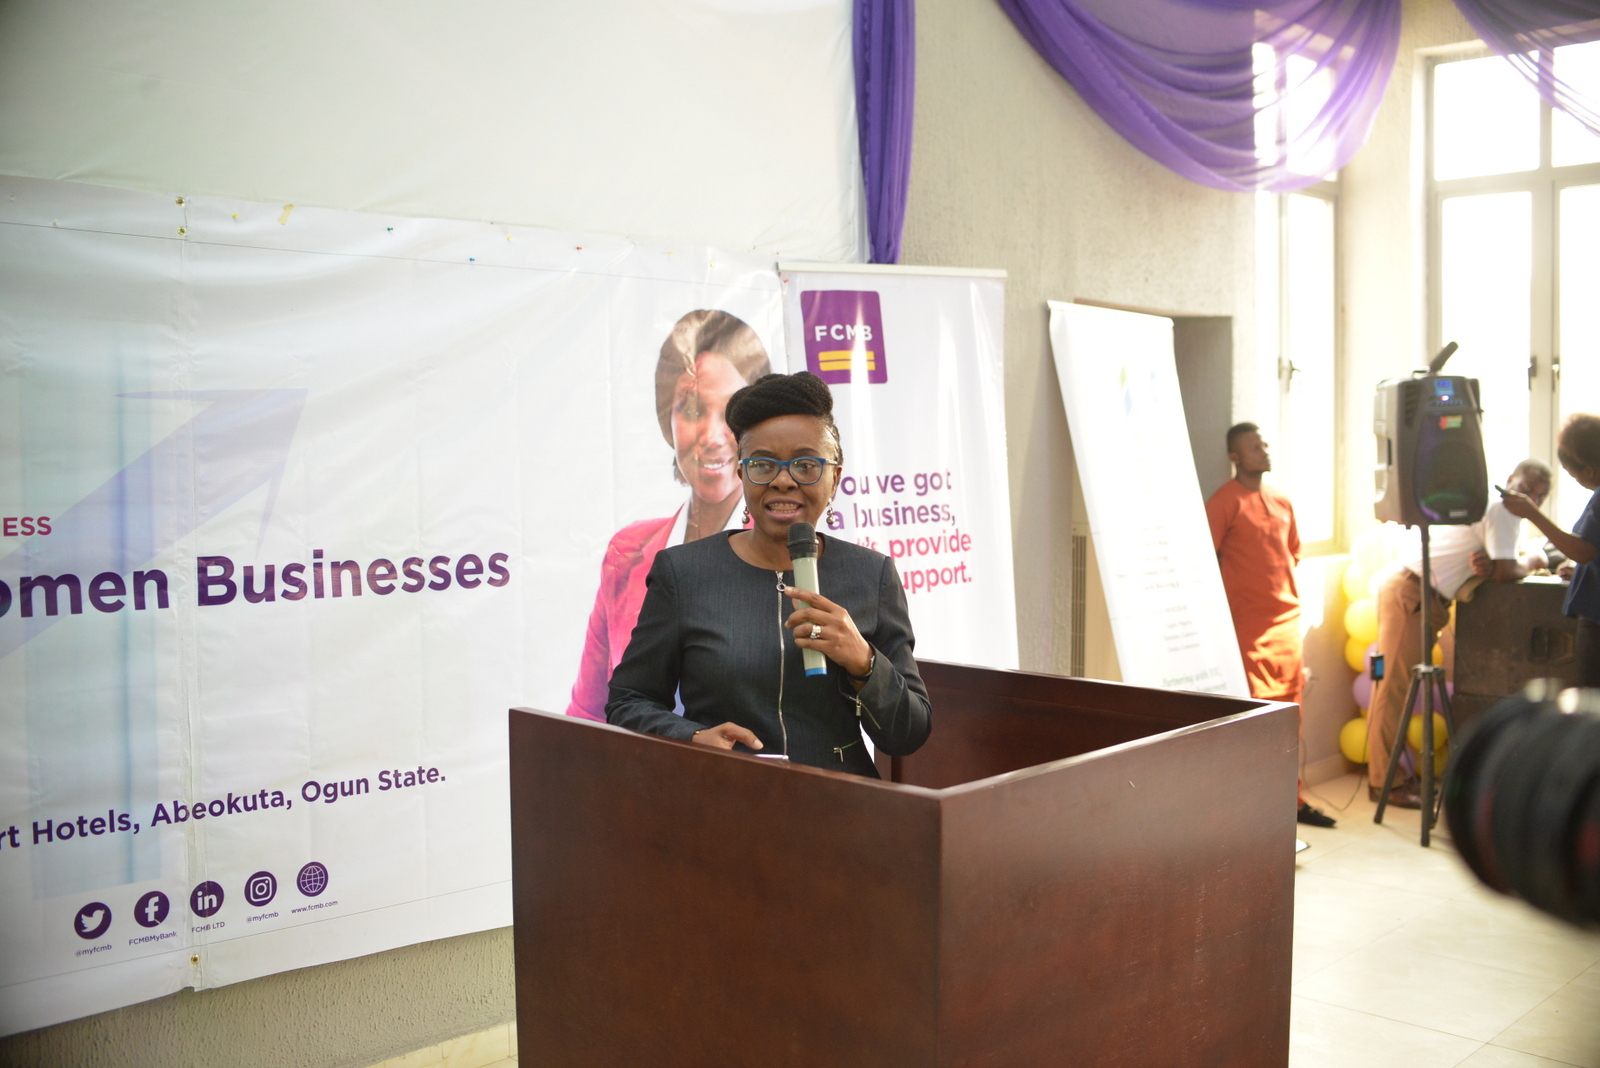 FCMB Deepens Empowerment of SMEs in Ogun State, as First Lady Commends Bank  %Post Title